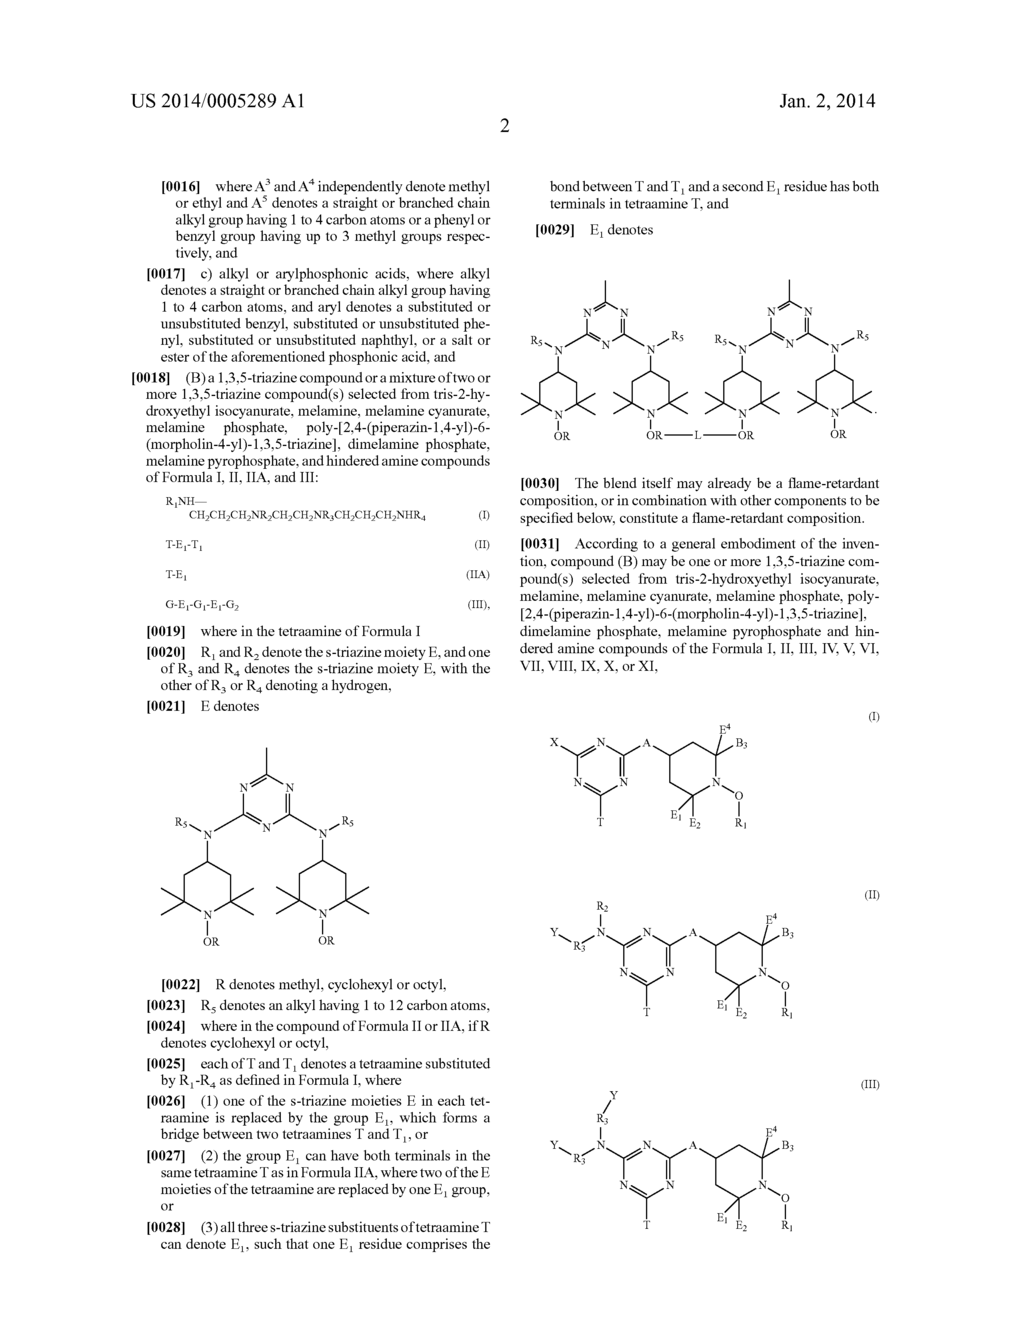 FLAME-RETARDANT COMPOSITION COMPRISING A PHOSPHONIC ACID DERIVATIVE - diagram, schematic, and image 03